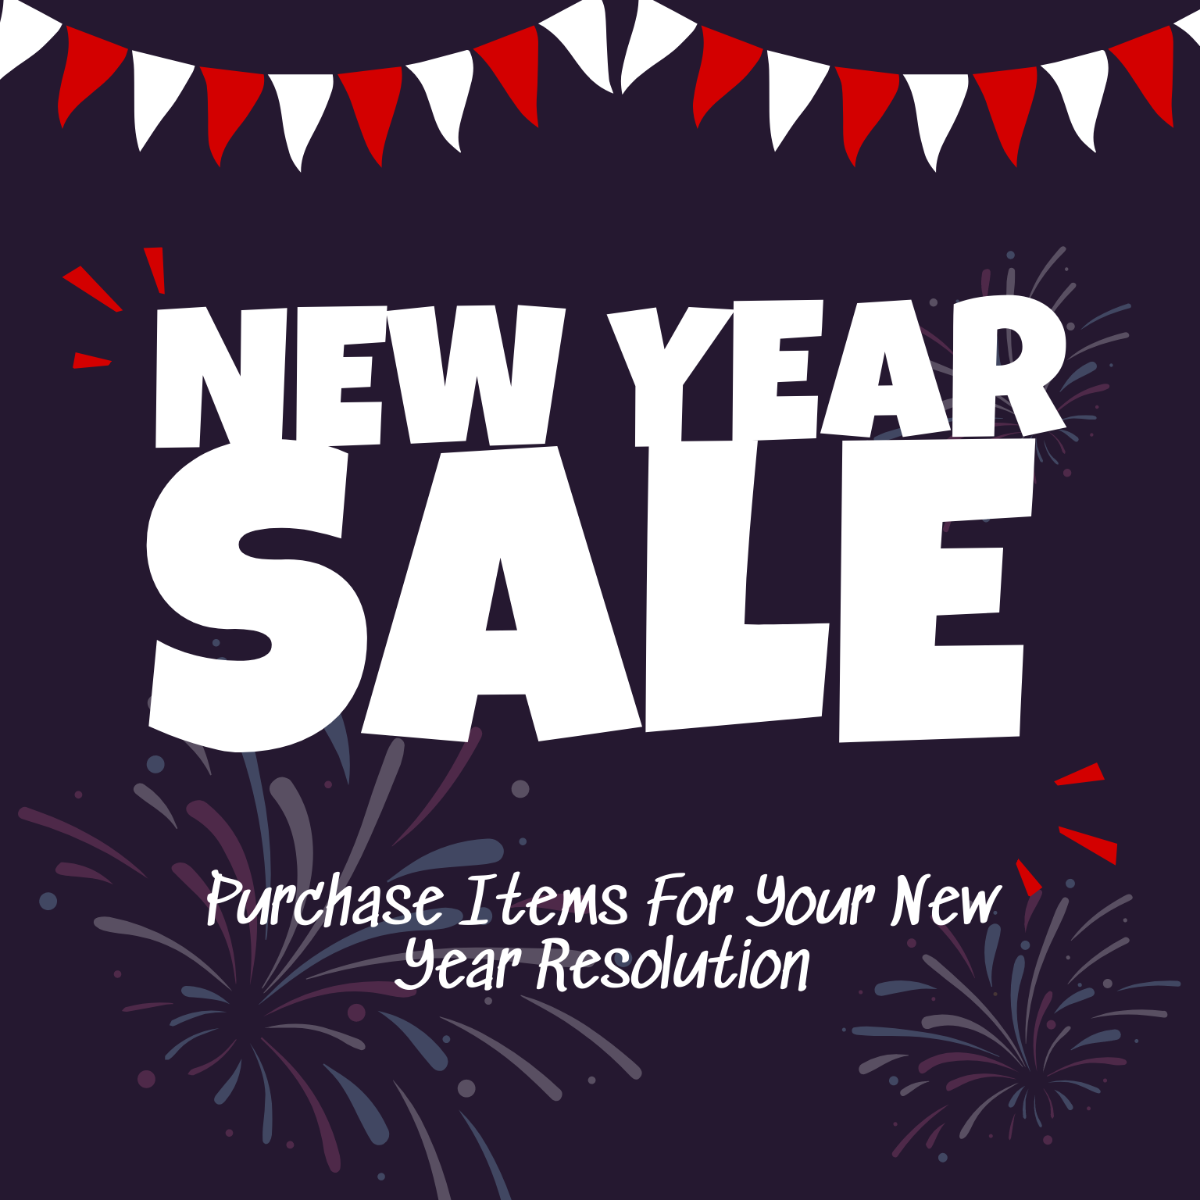 New Year's Eve Promotion Vector